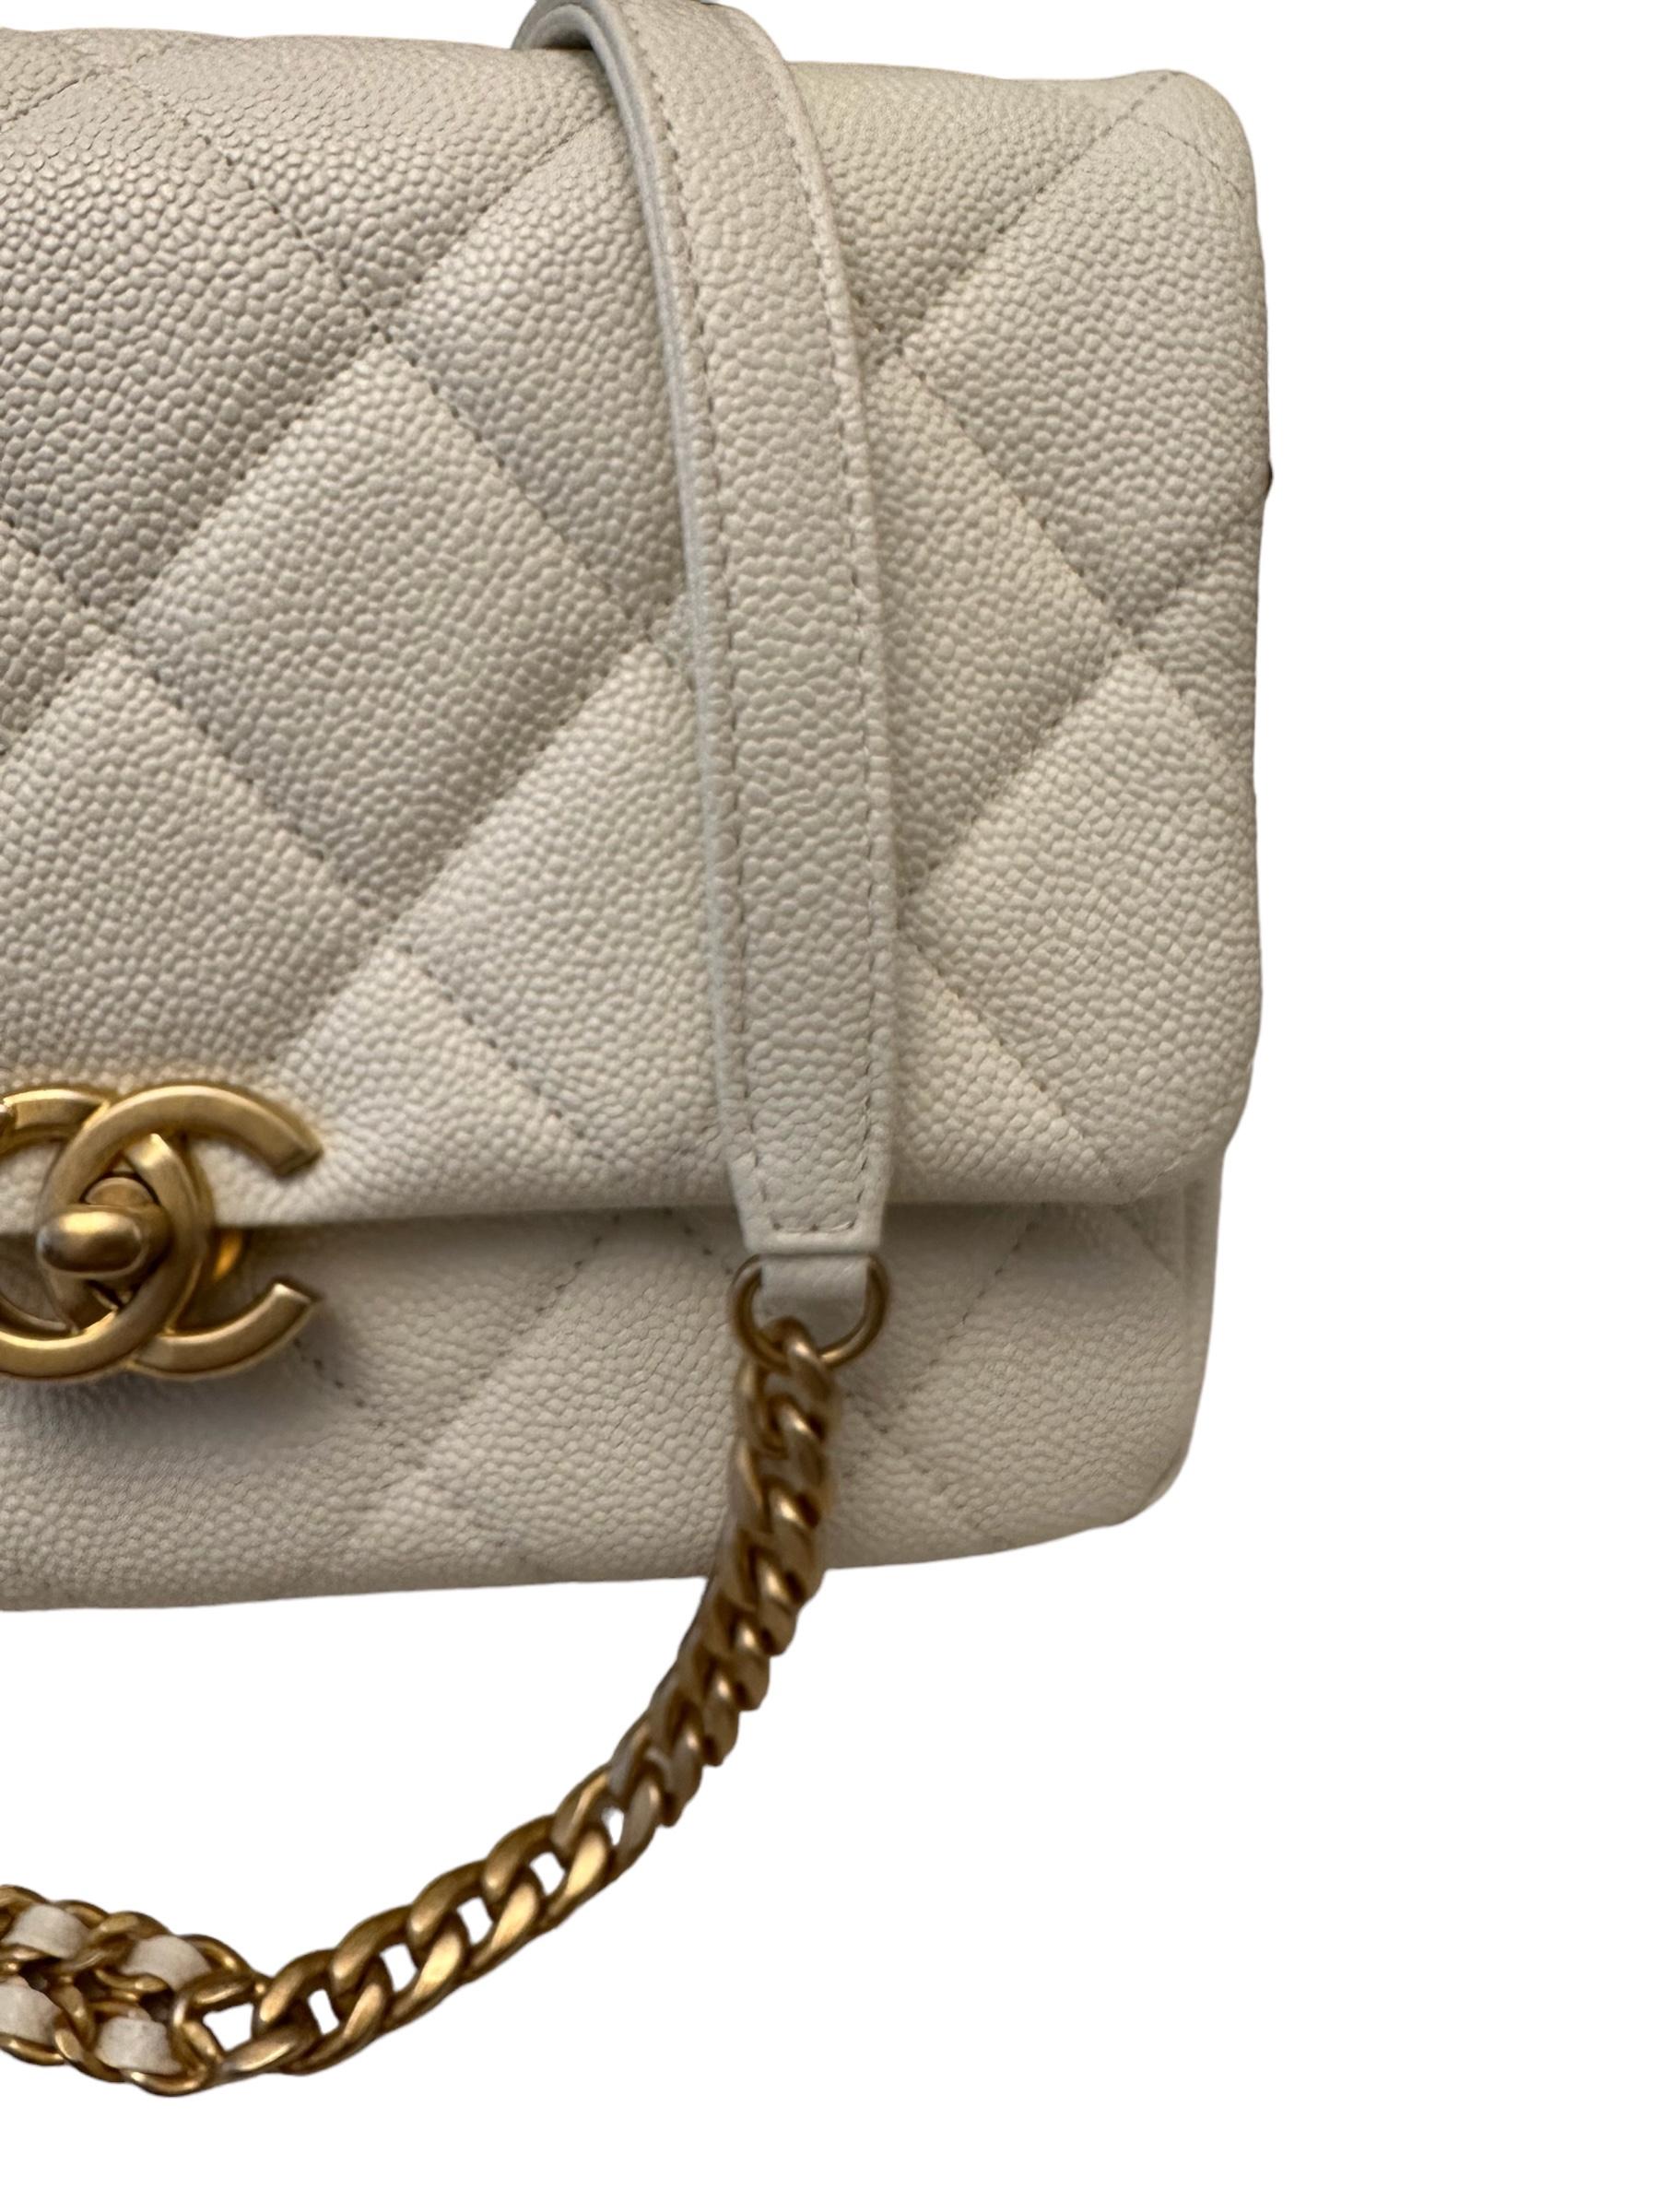 Chanel 22P Melody Flap White Caviar Small Bag  For Sale 7